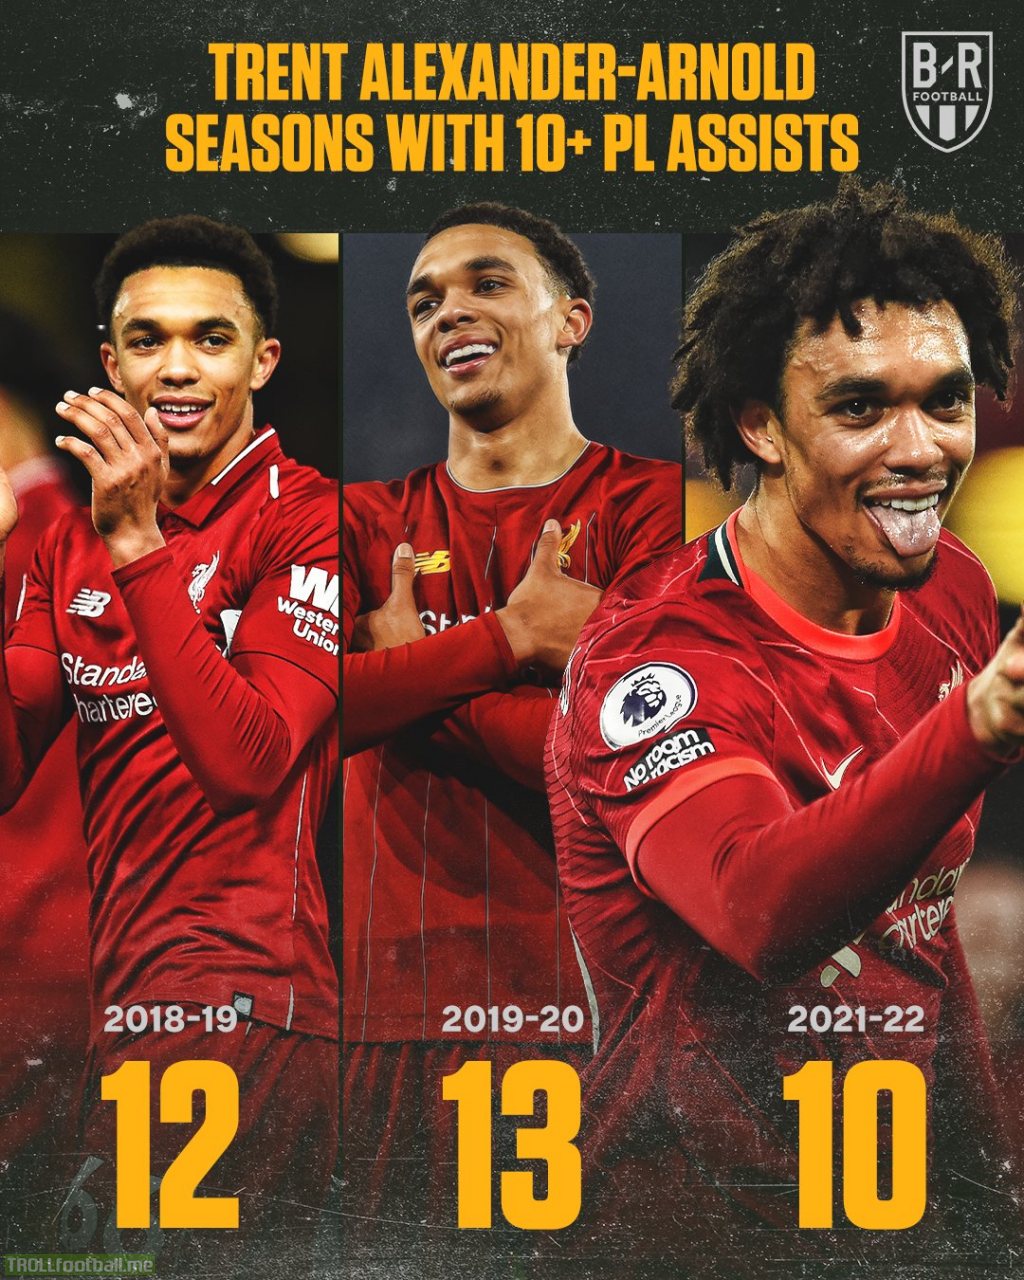 Trent Alexander-Arnold already has 10 Premier League assists this season. He’s the first defender to assist 10+ in three different PL seasons. He’s still only 23.